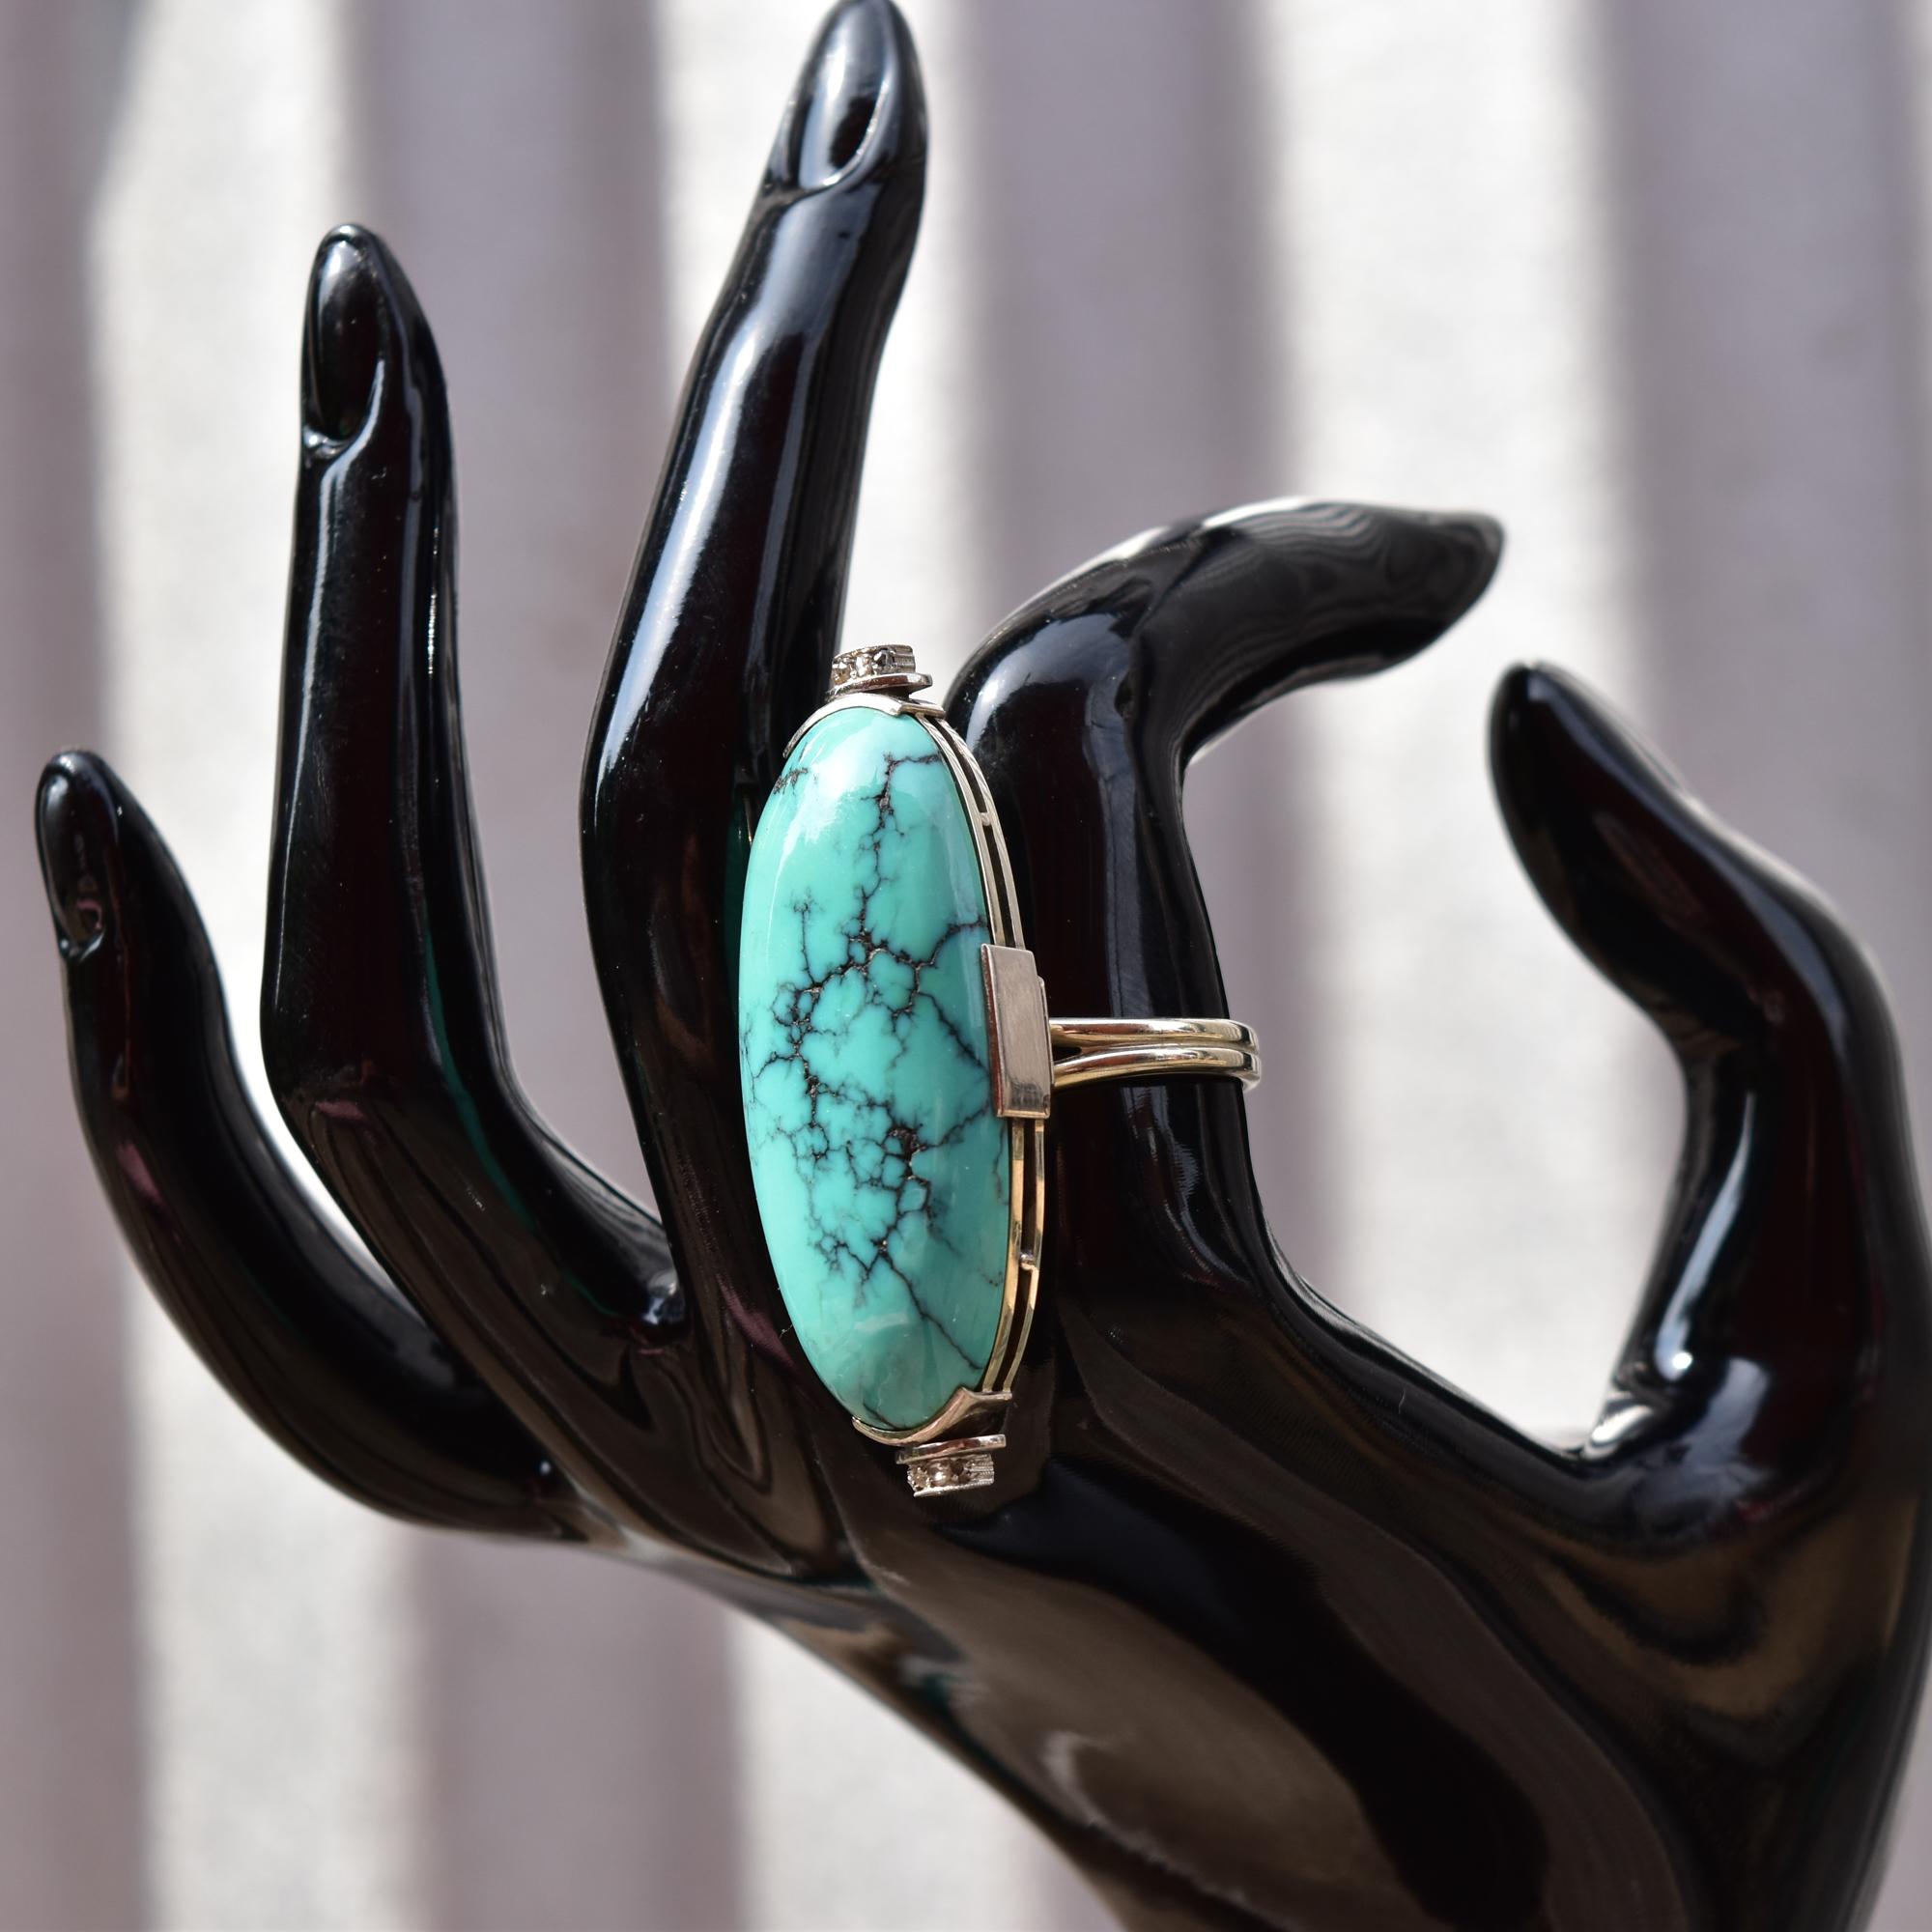 A huge turquoise cabochon diamond accent statement ring set in platinum and 14k white gold. Features a long-cut turquoise cabochon mounted in a platinum bezel setting with 4-diamond chip embellishments on each end. The turquoise has a bright blue